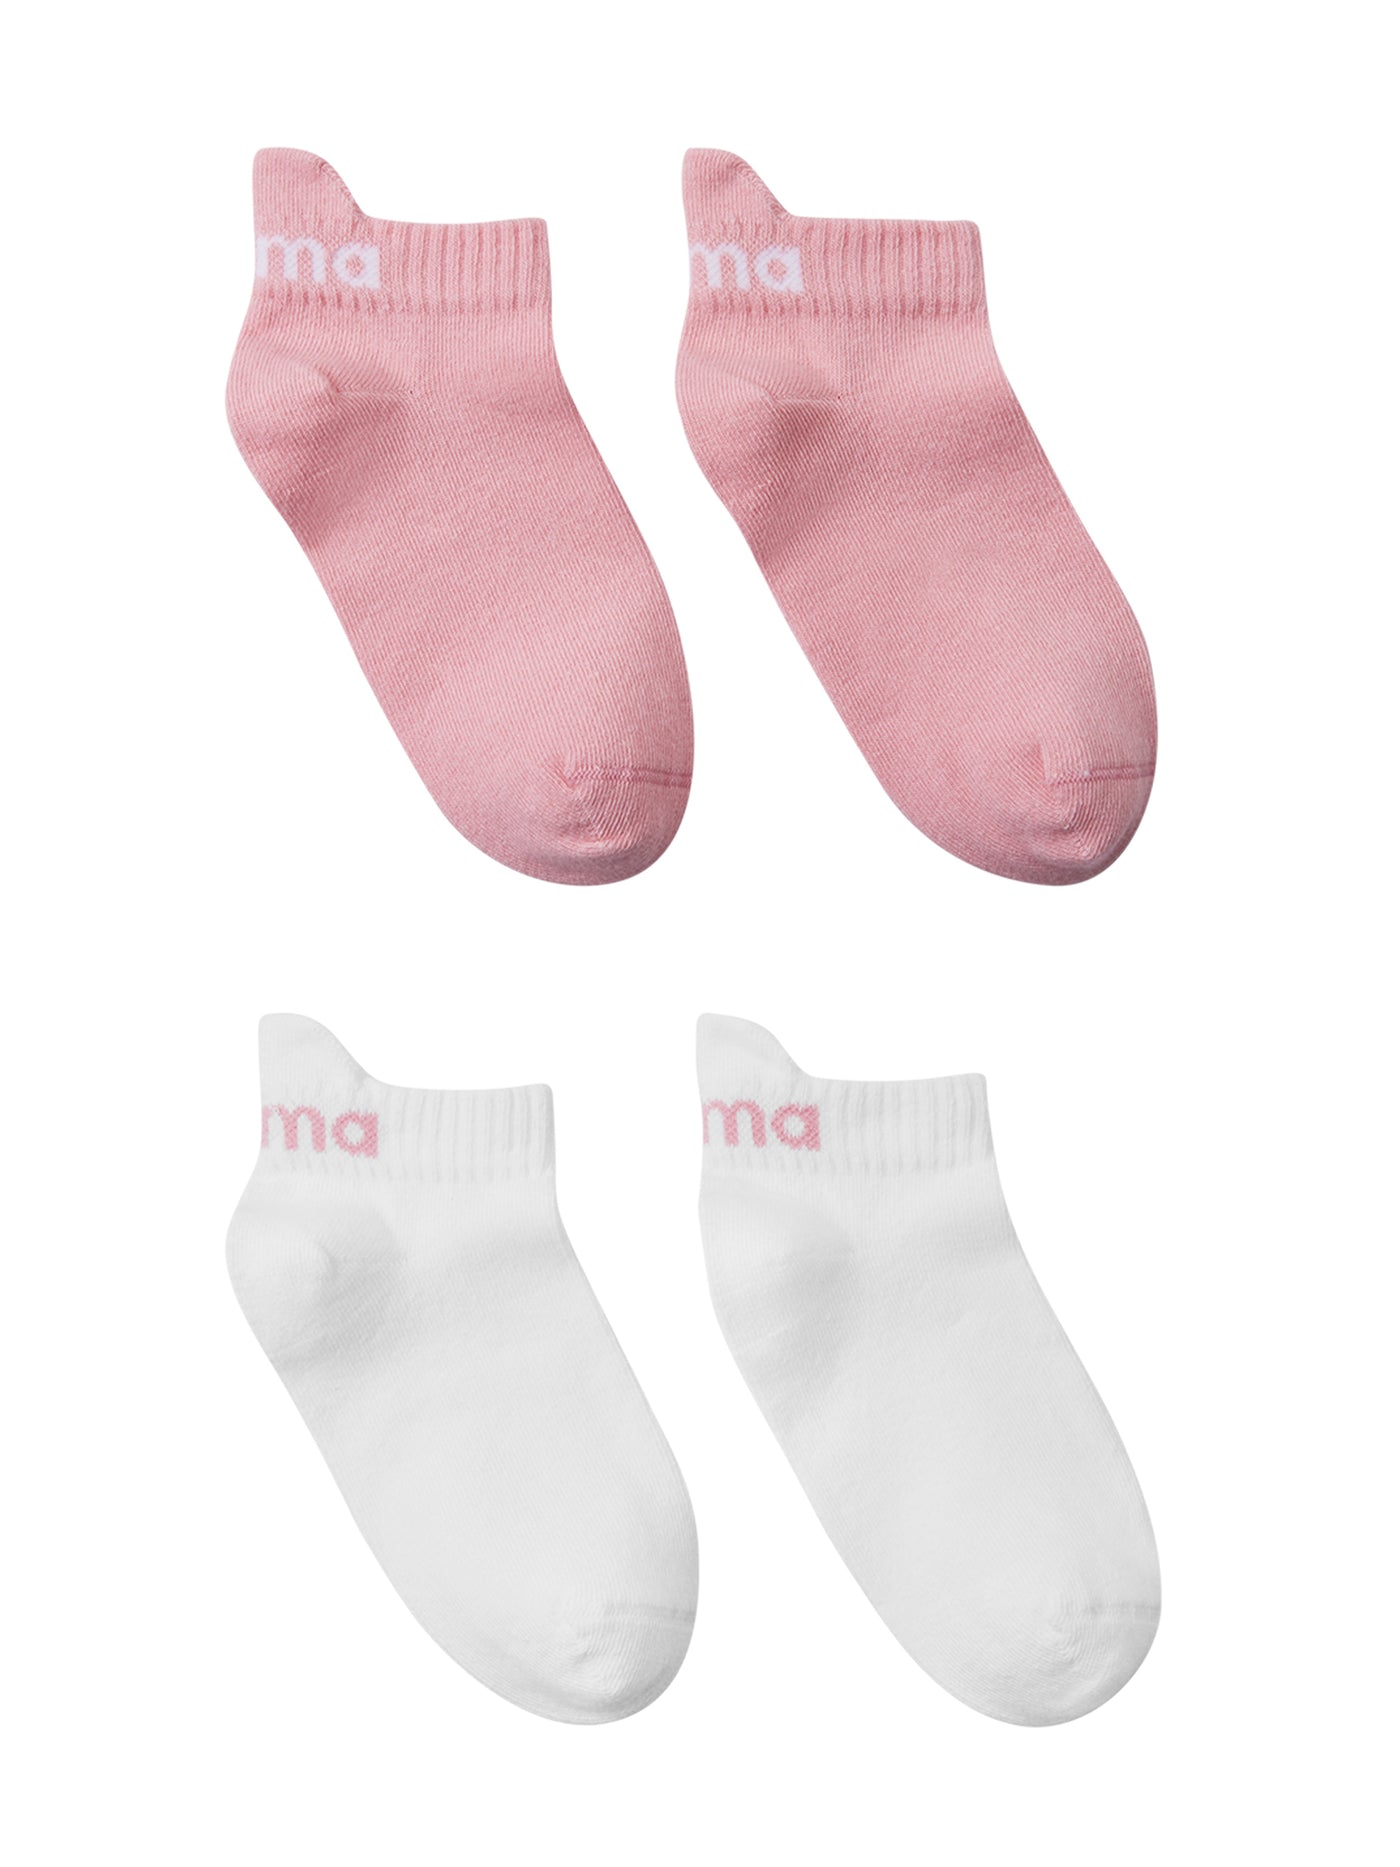 Vipellys Socks - Children's and youth ankle socks 2 pairs